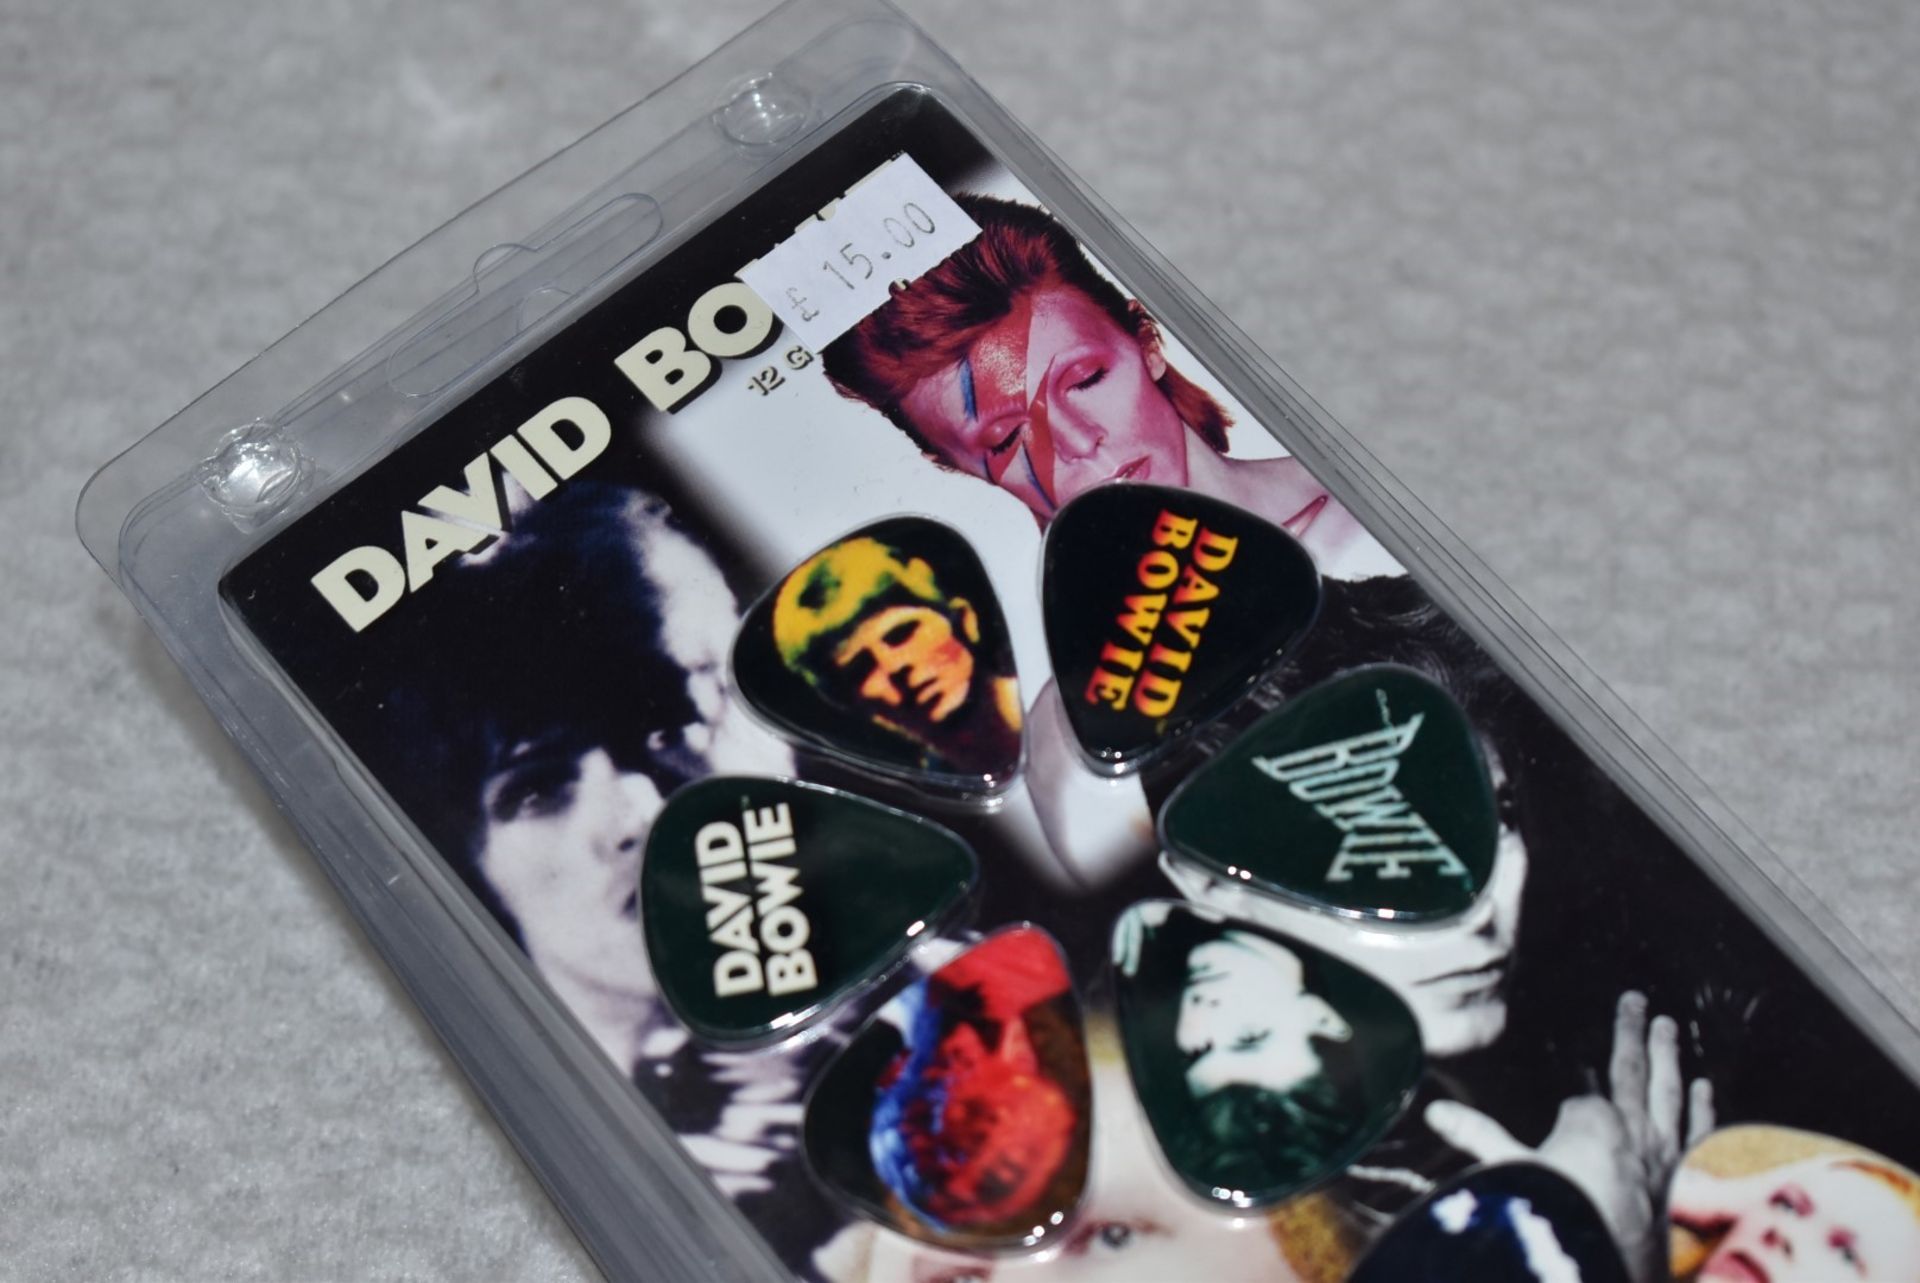 10 x David Bowie Guitar Pick Multipacks By Perri's - 6 Picks Per Pack - Officially Licensed - Image 4 of 7